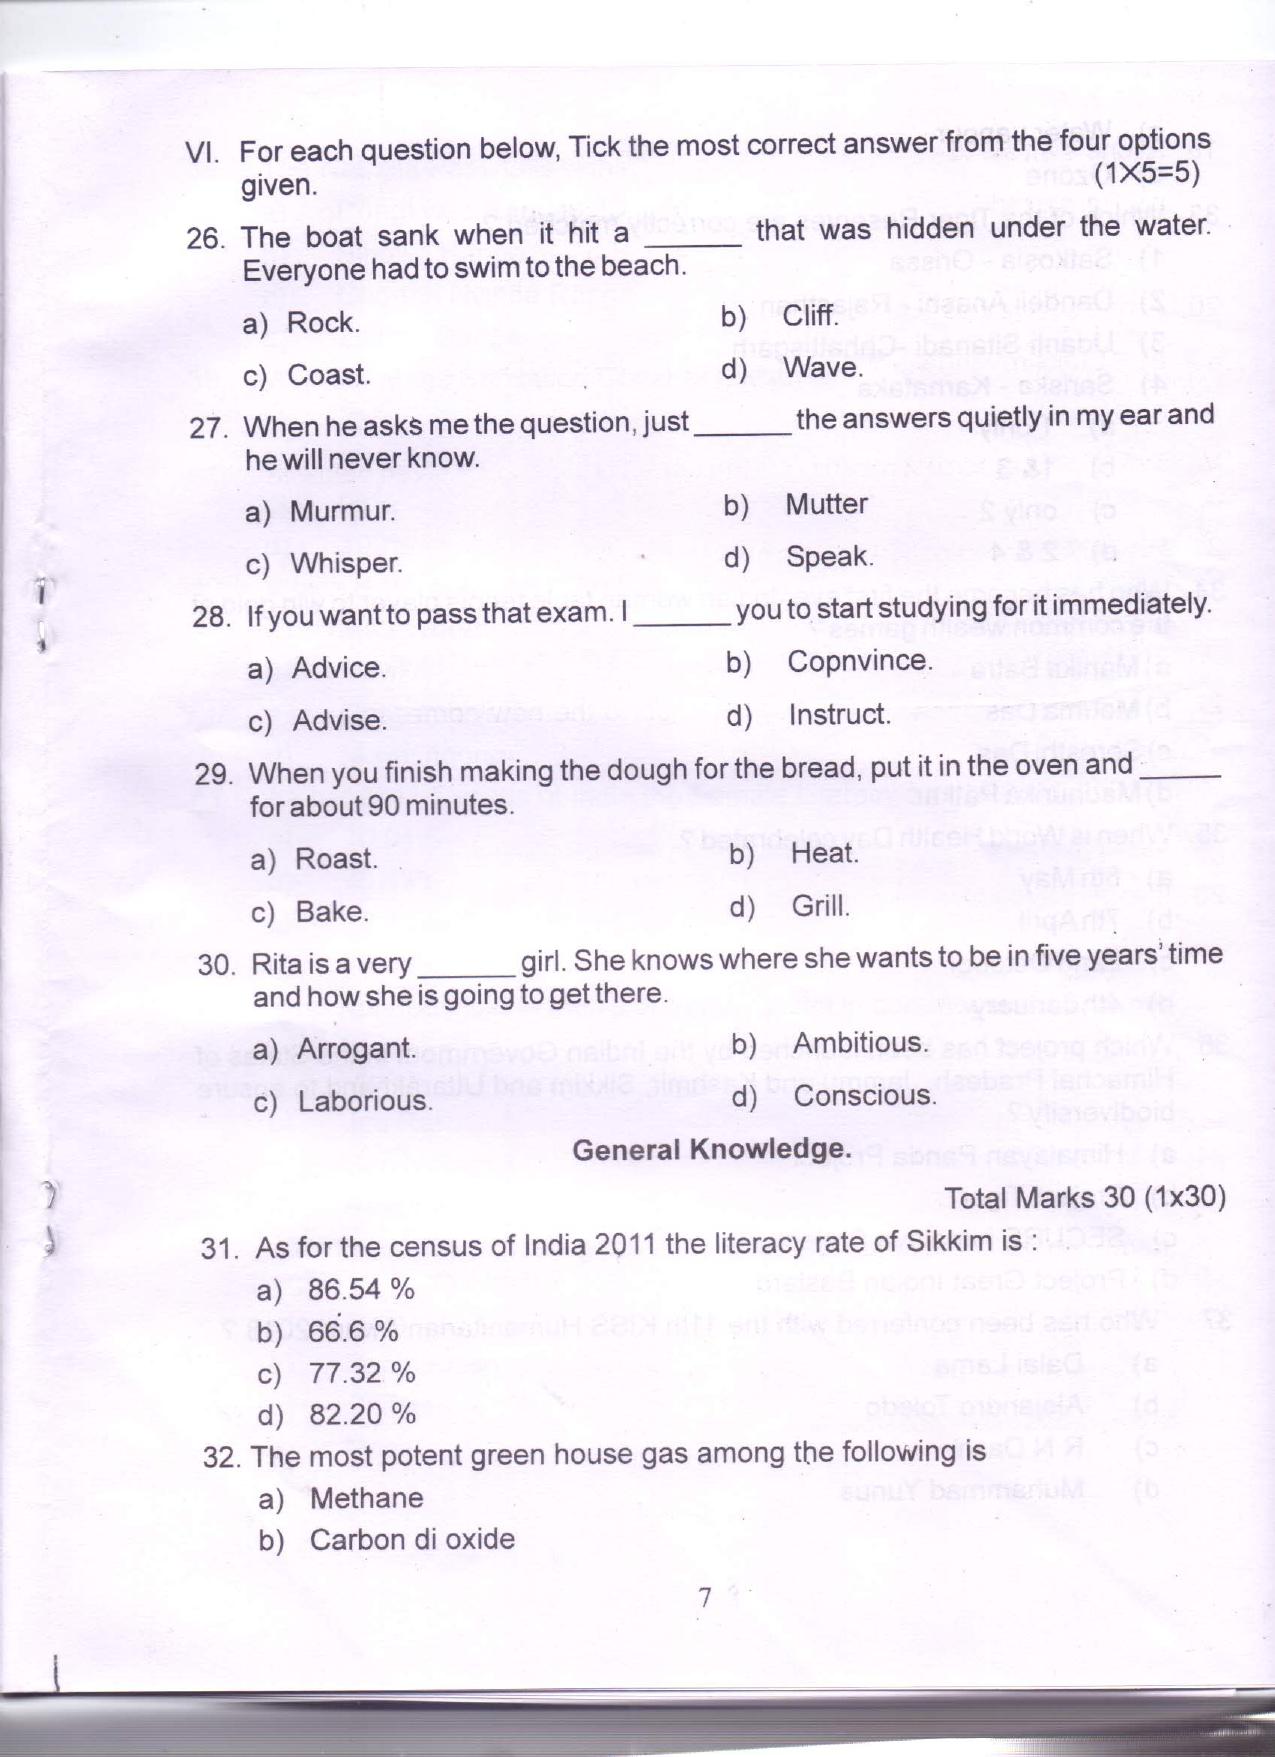 PDF Download Of SPSC MPHW General English & General Knowledge Previous Papers - Page 6